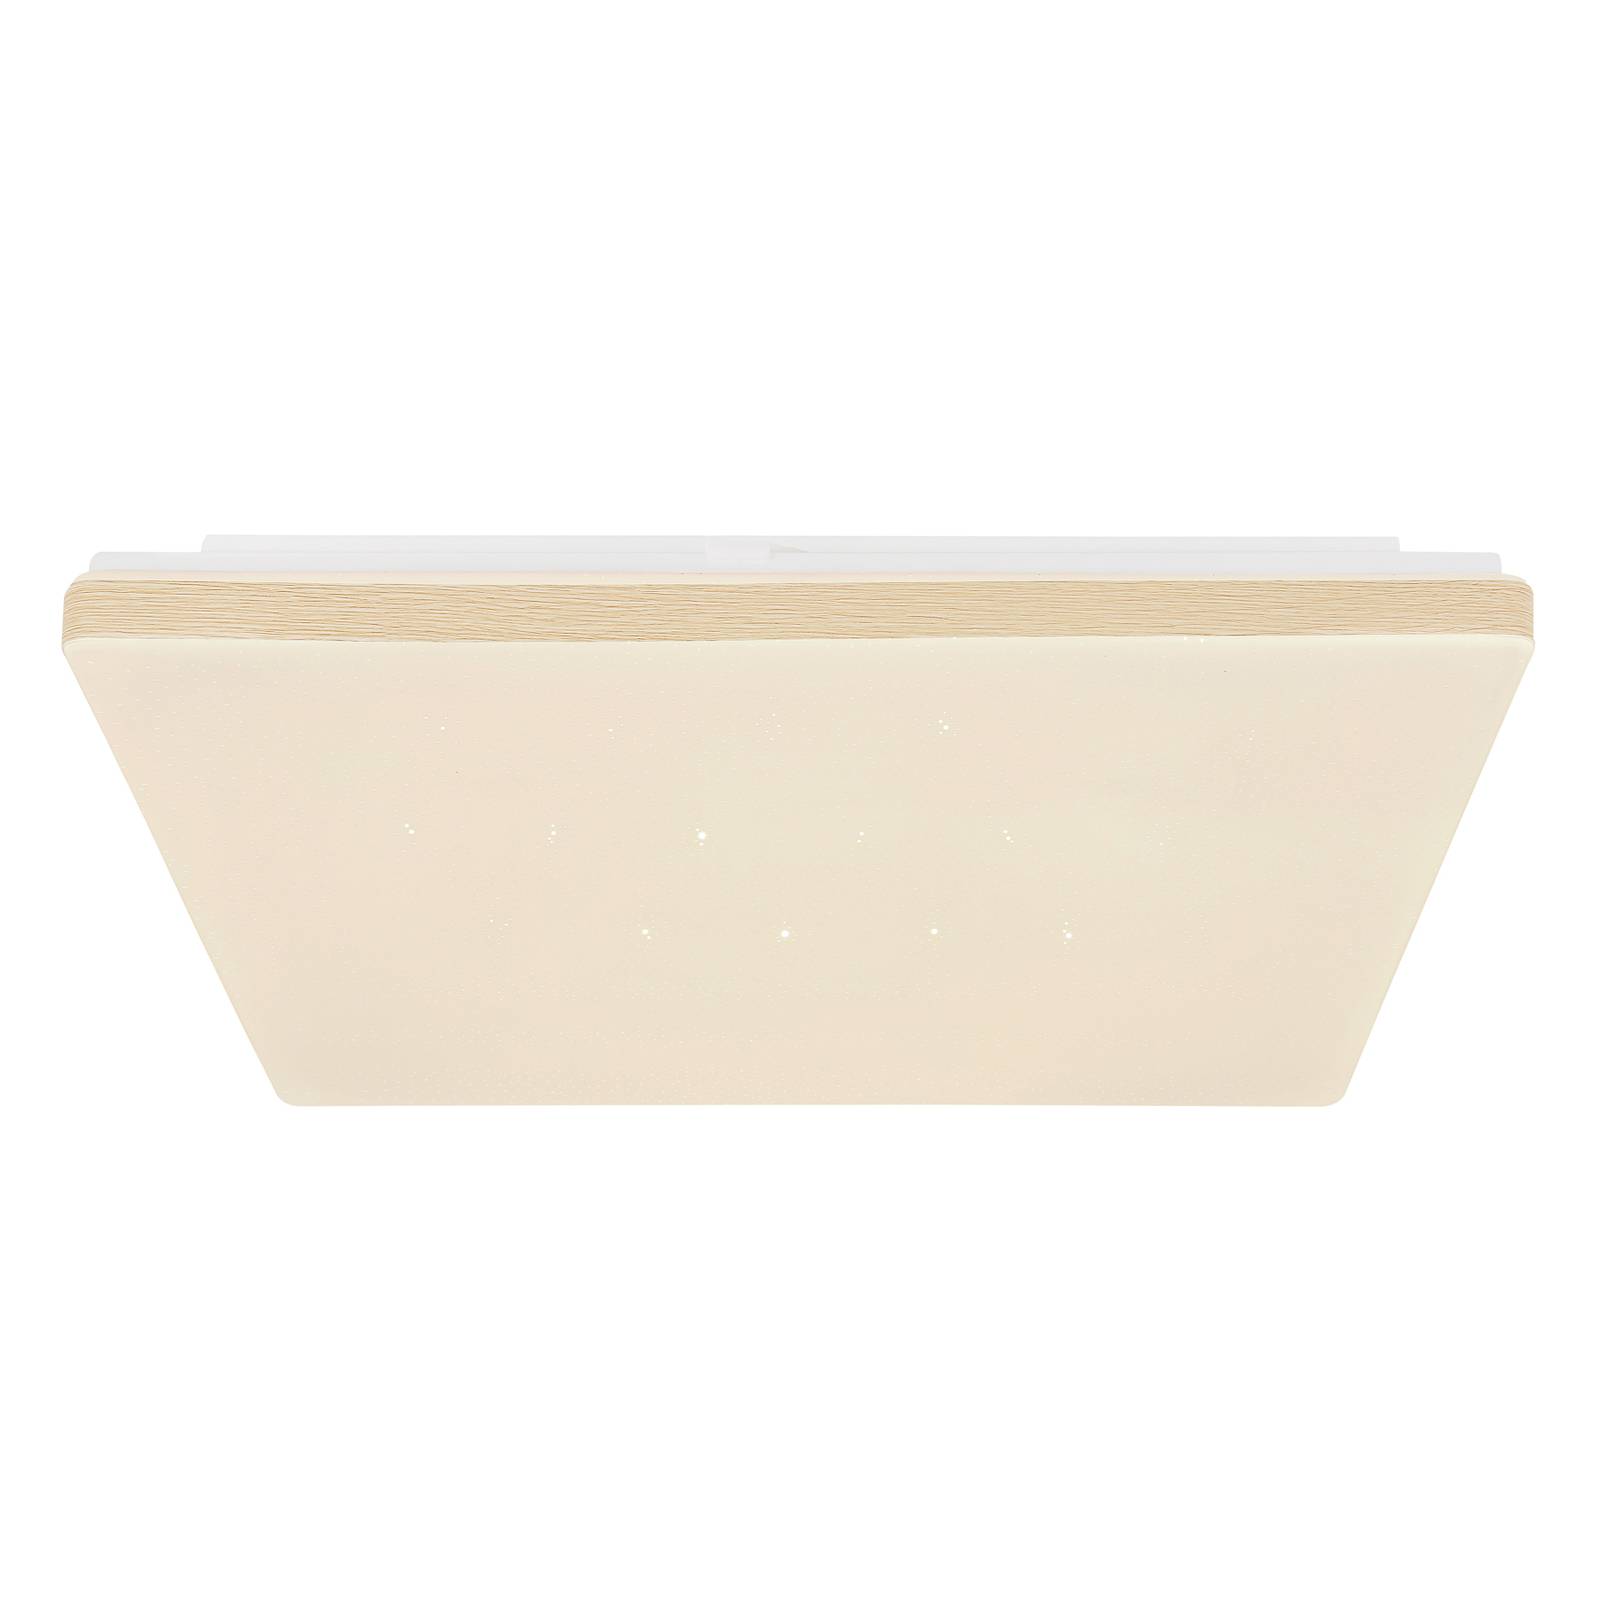 Ully LED ceiling light smart Tuya CCT wooden look